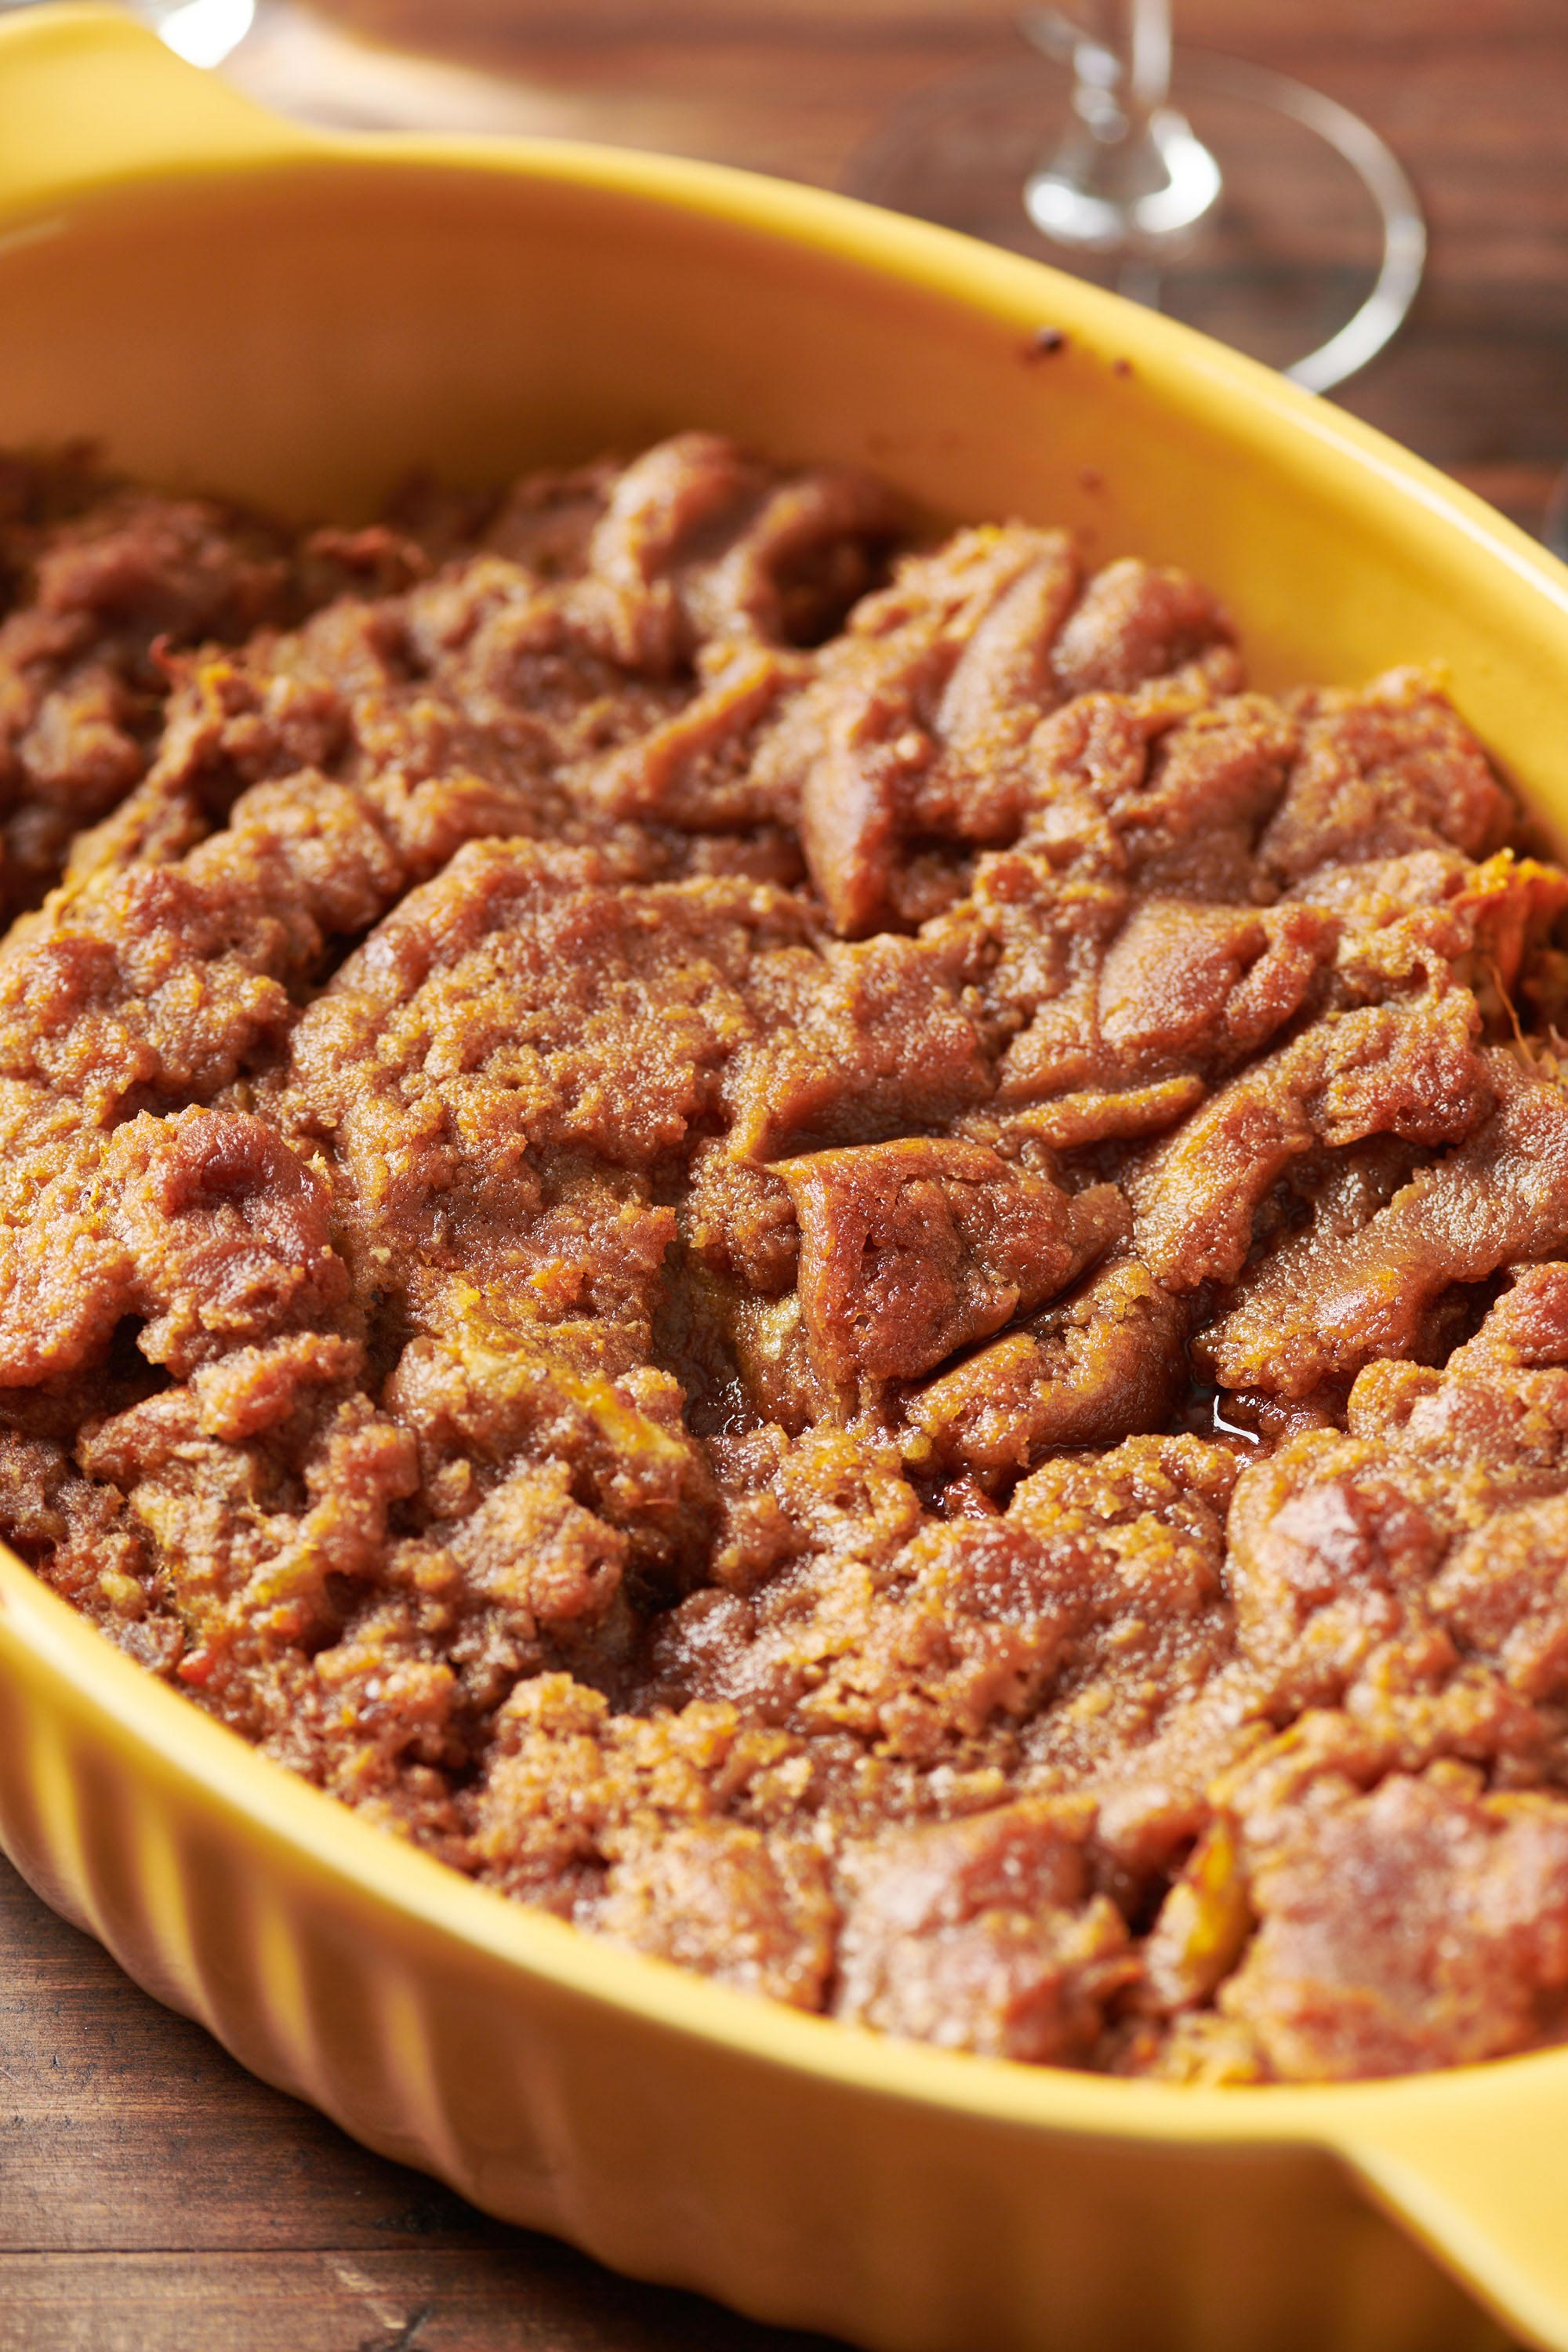 Baked Sweet Potato Casserole in a yellow dish.